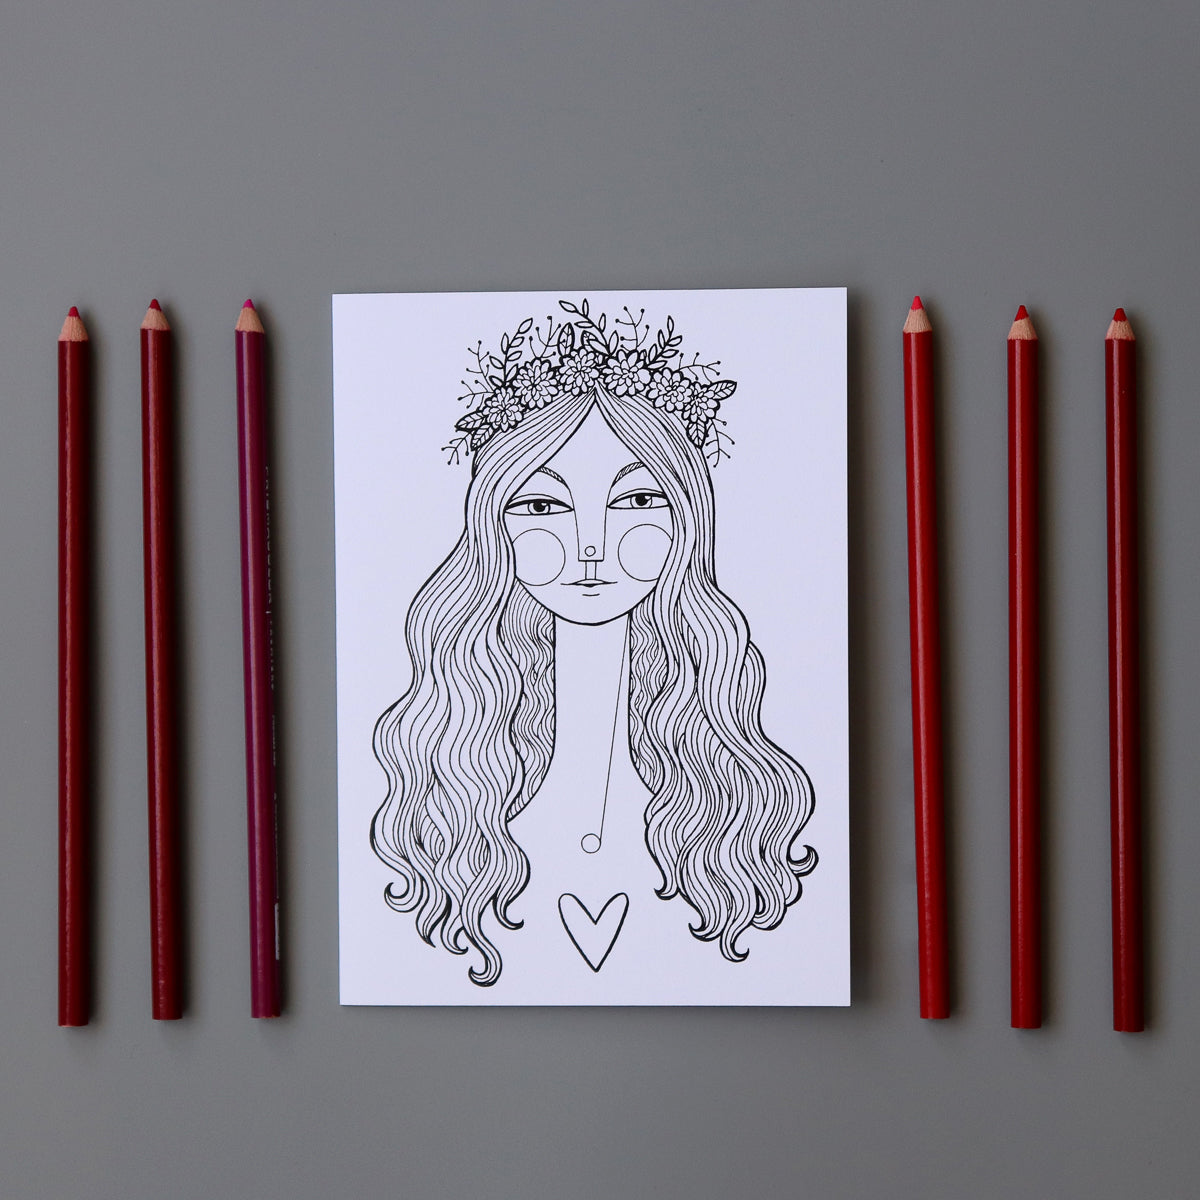 Halo Girl coloring cards with red and pink colored pencils. These cards can be colored on or left black and white.